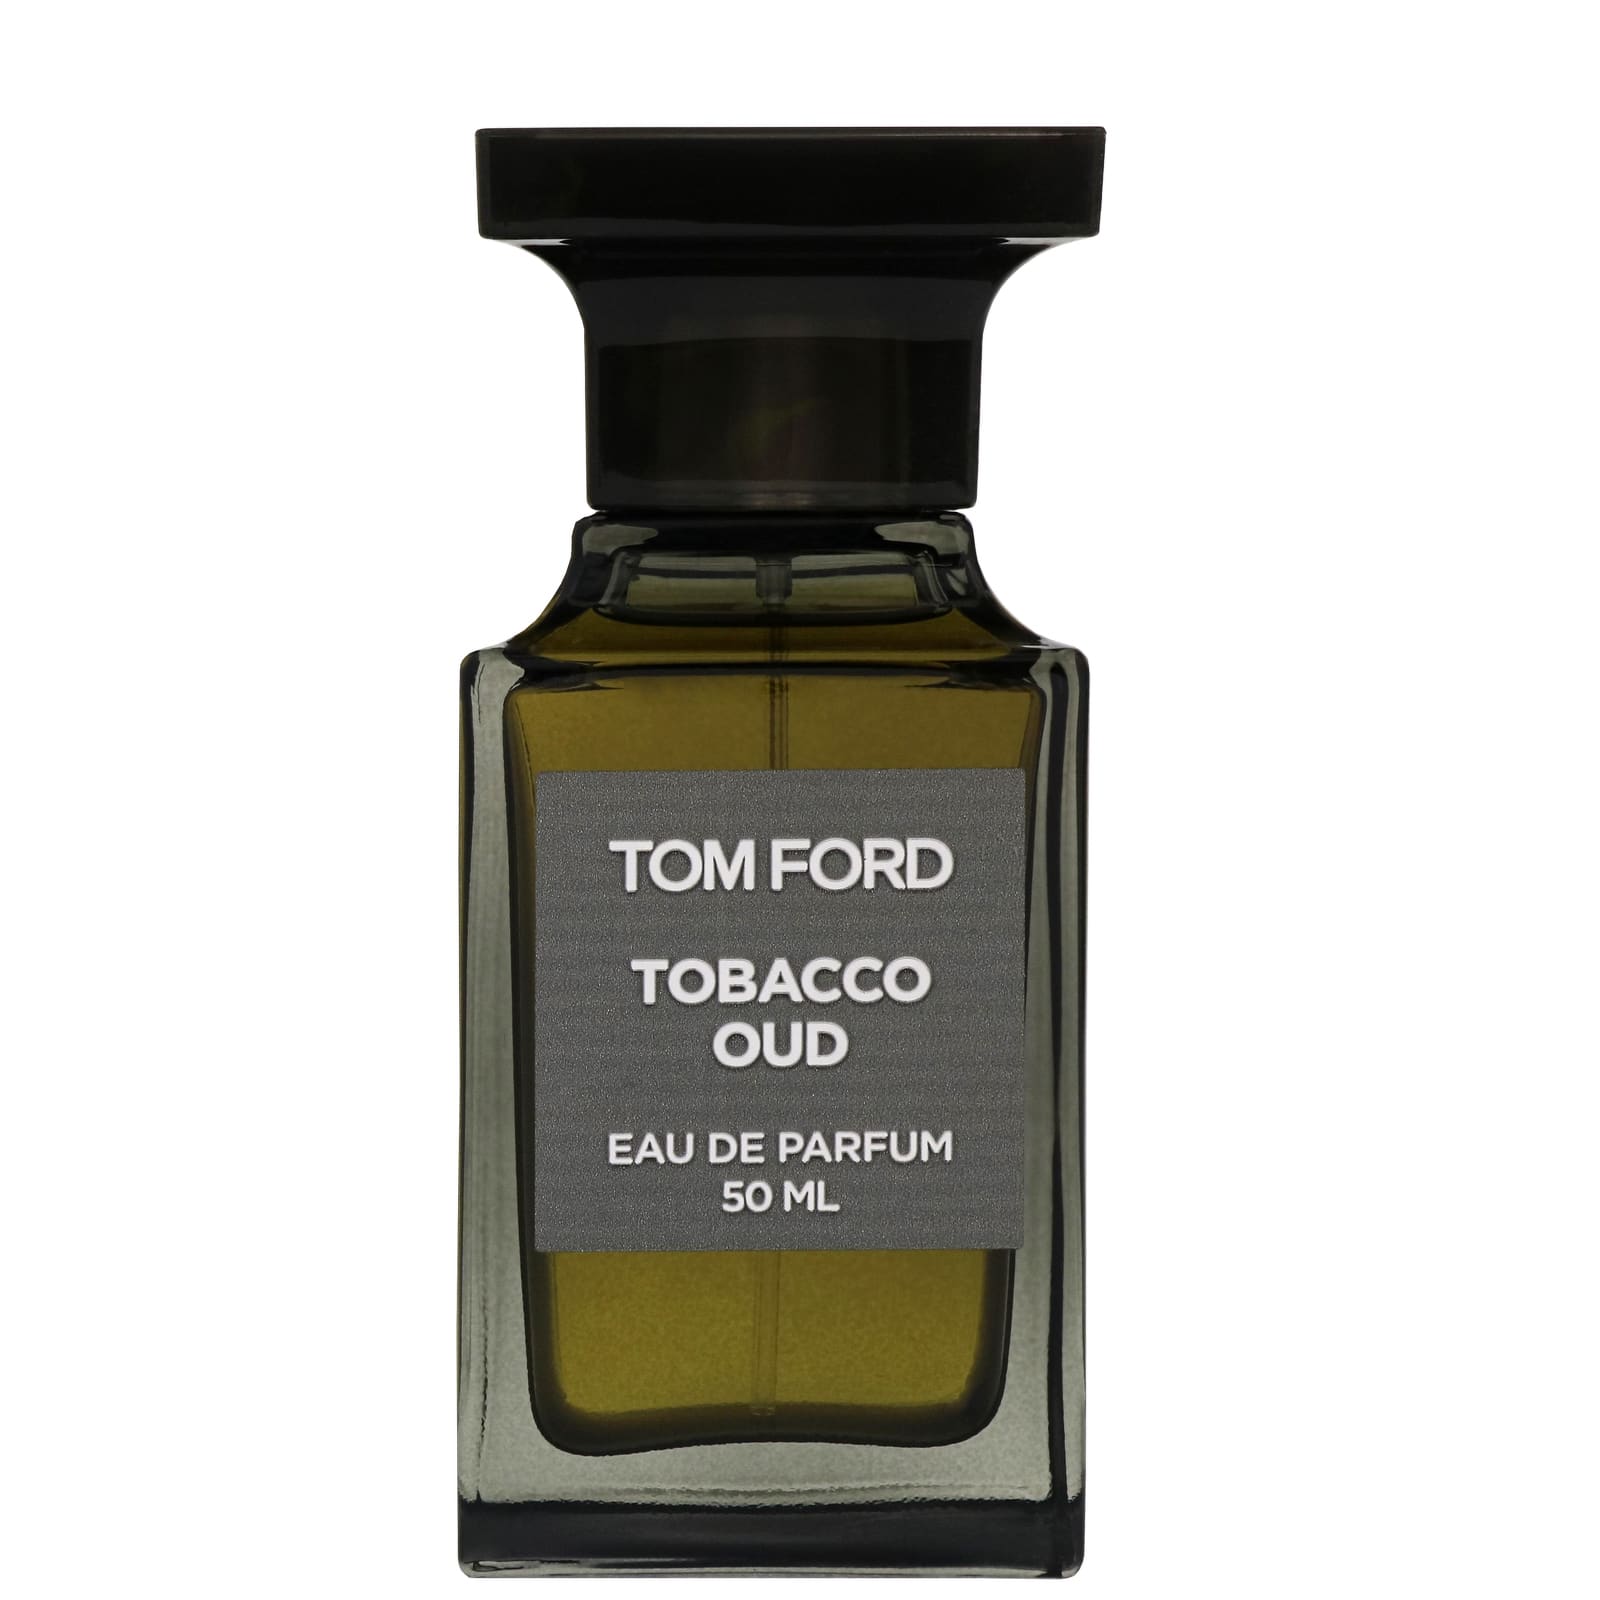 Tom Ford - Tobacco Oud Perfume Oil Review